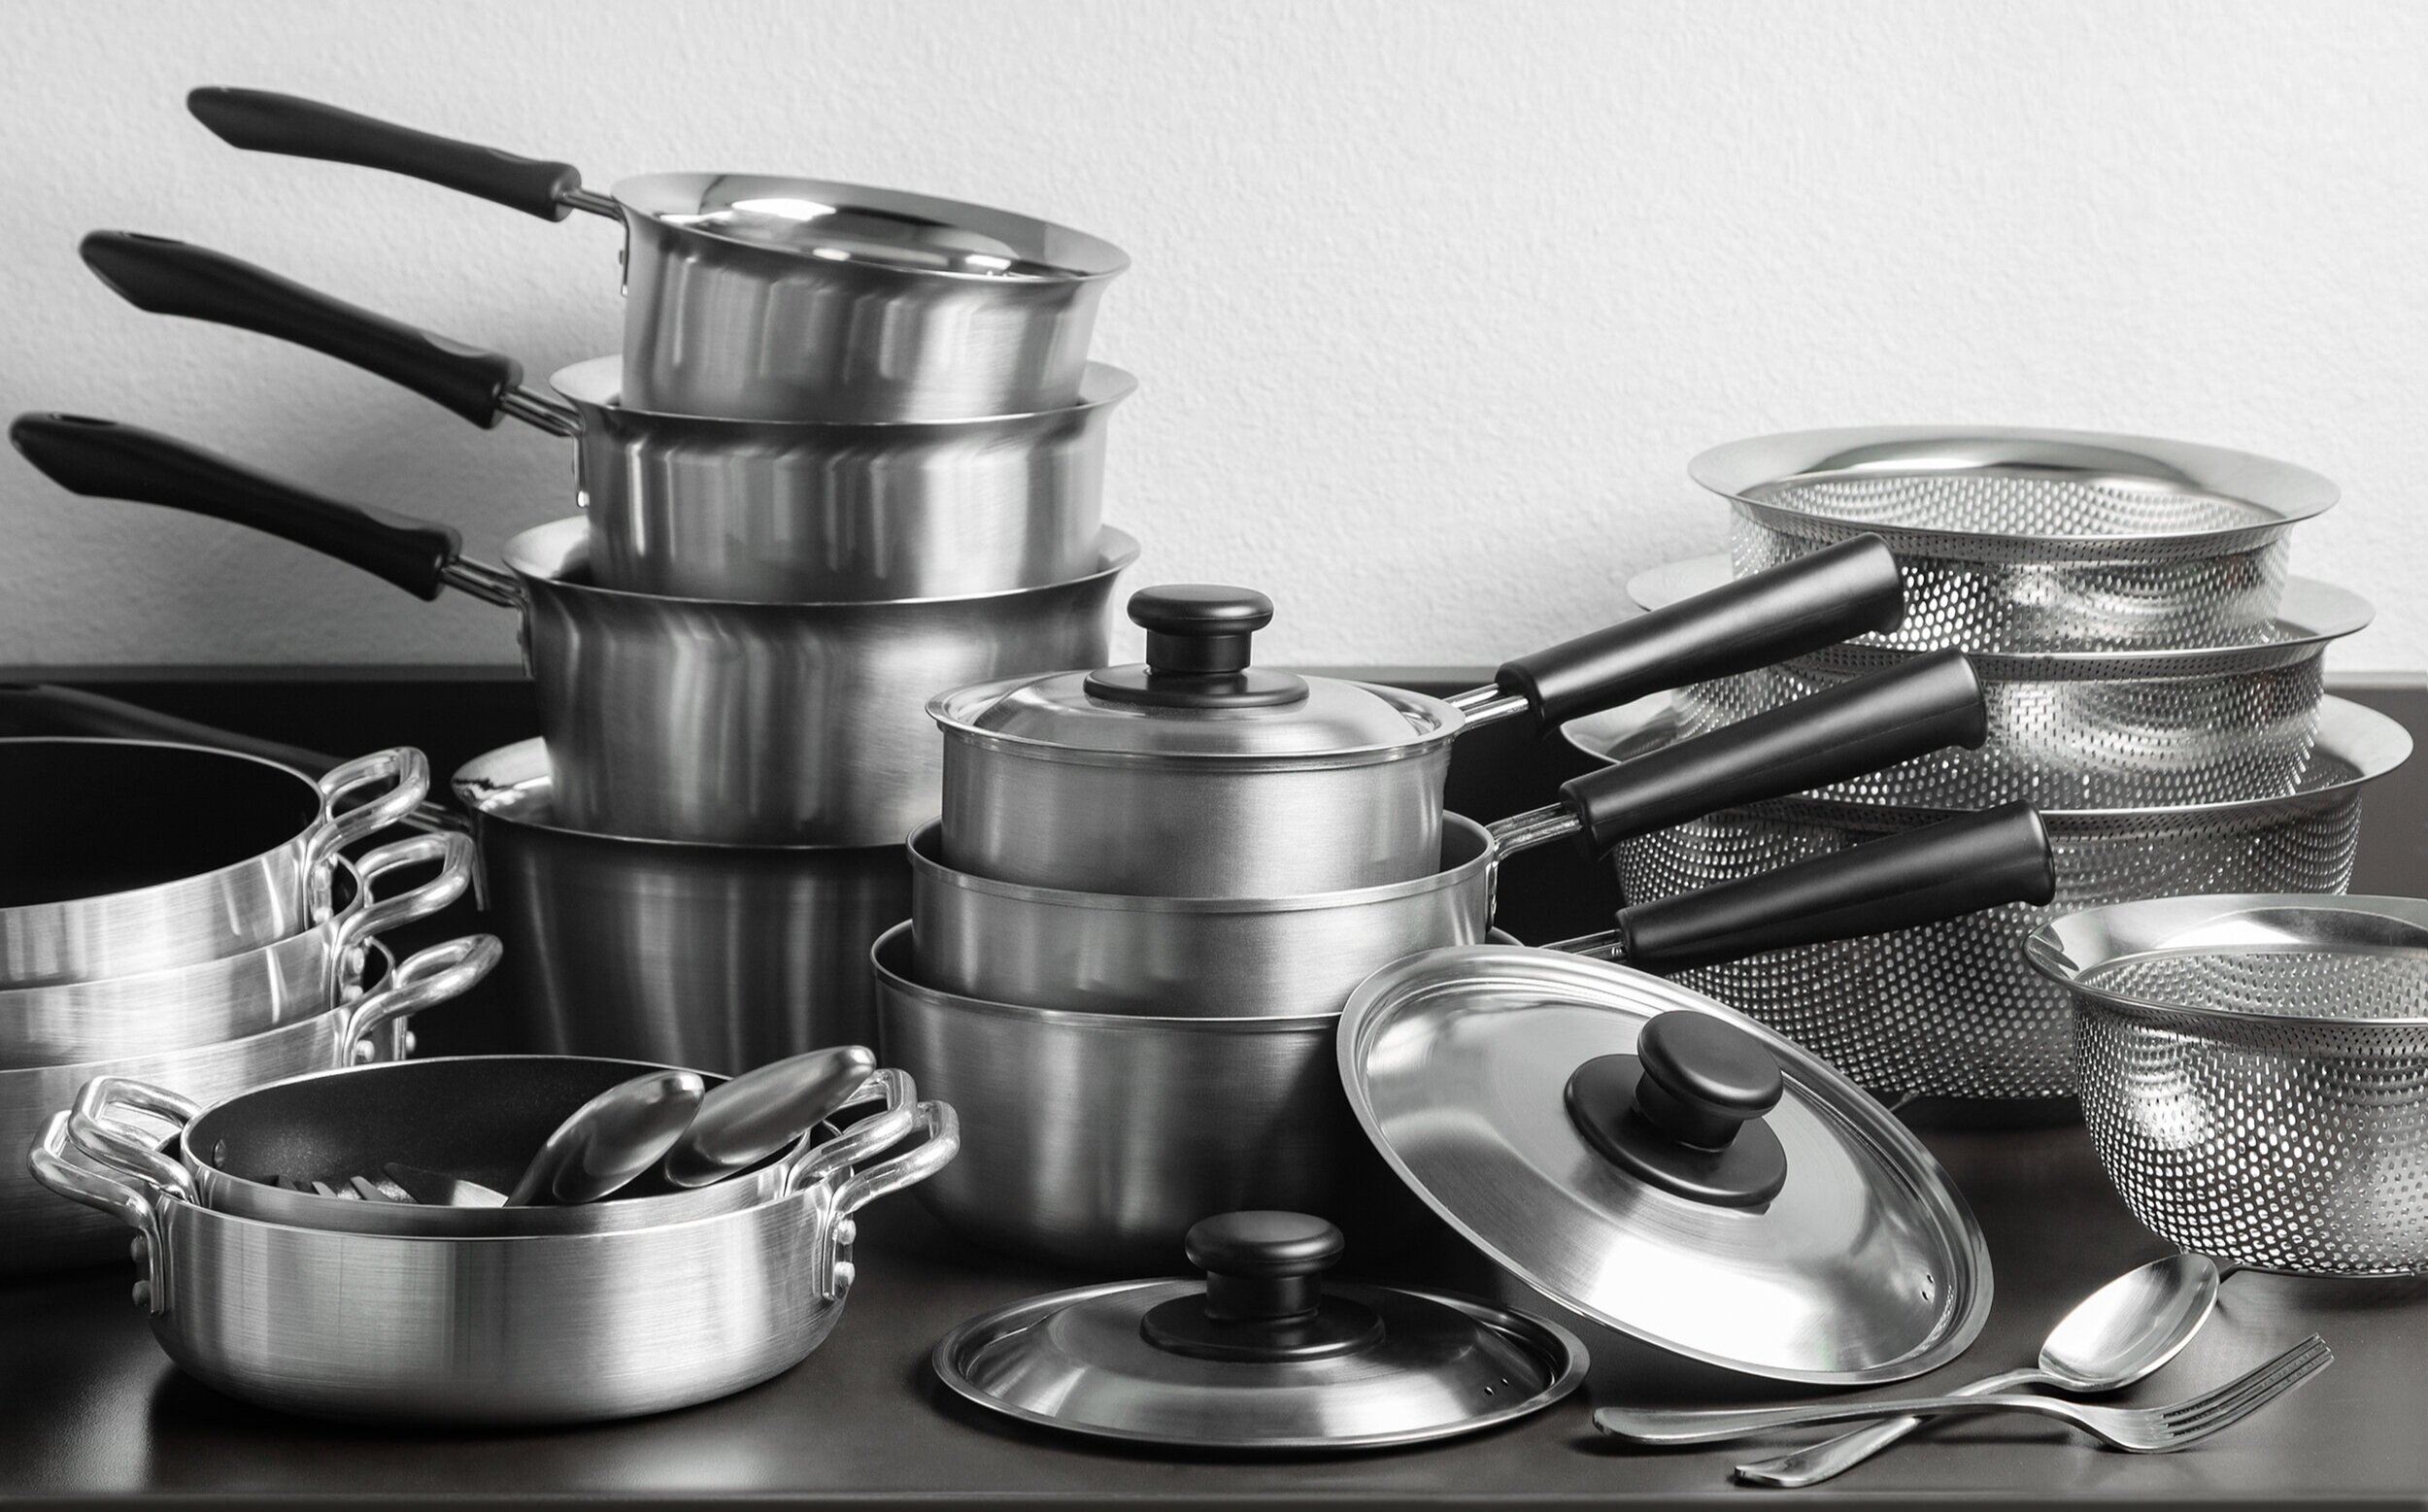 Japan Quality Stainless Steel Cookwares